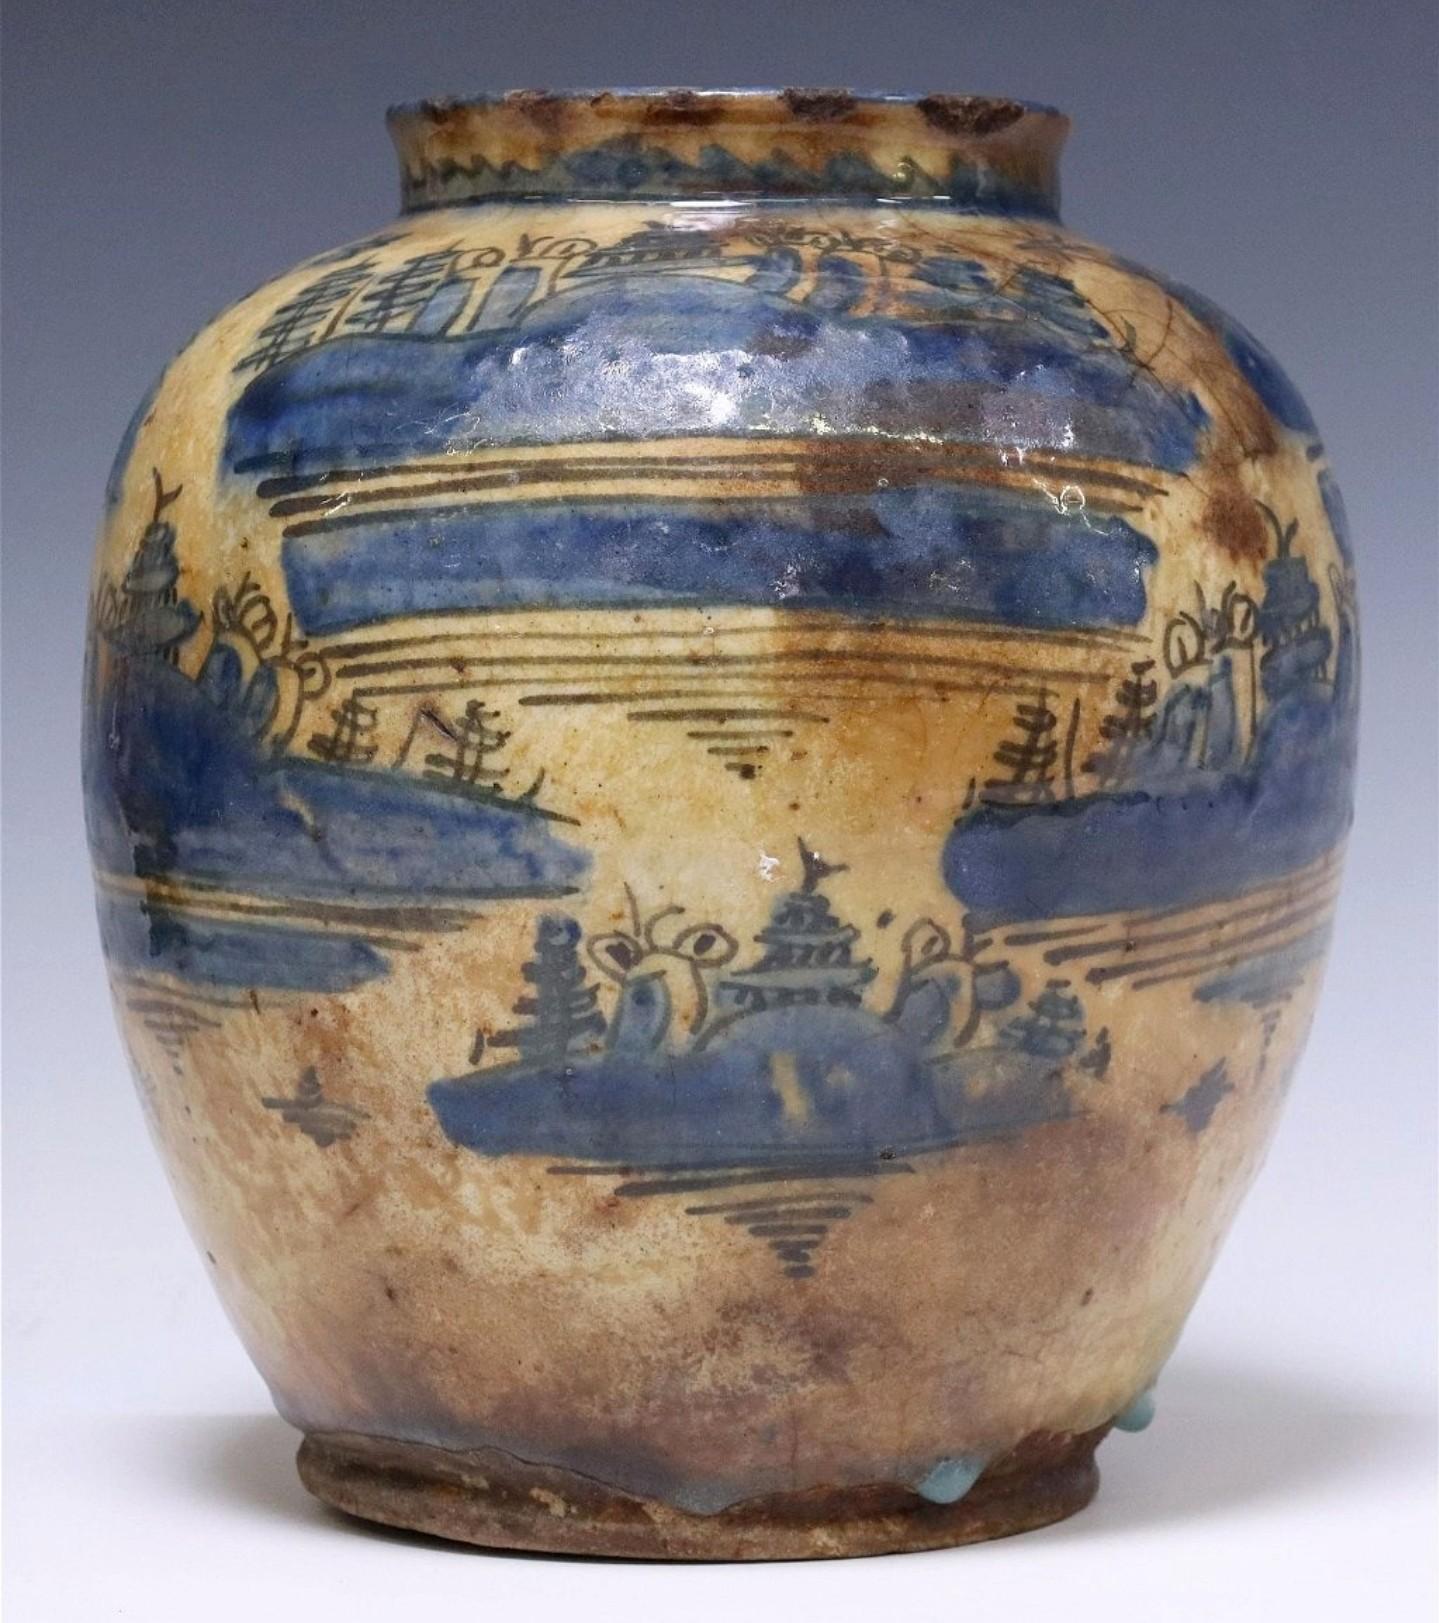 A scarce Safavid dynasty (1501-1736) blue and white glazed earthenware pottery jar or vase, circa 1600, Persia, having a tapered body, cream ground with blue underglaze and hand-painted Islamic architectural landscape motifs. 

Dimensions: (approx)